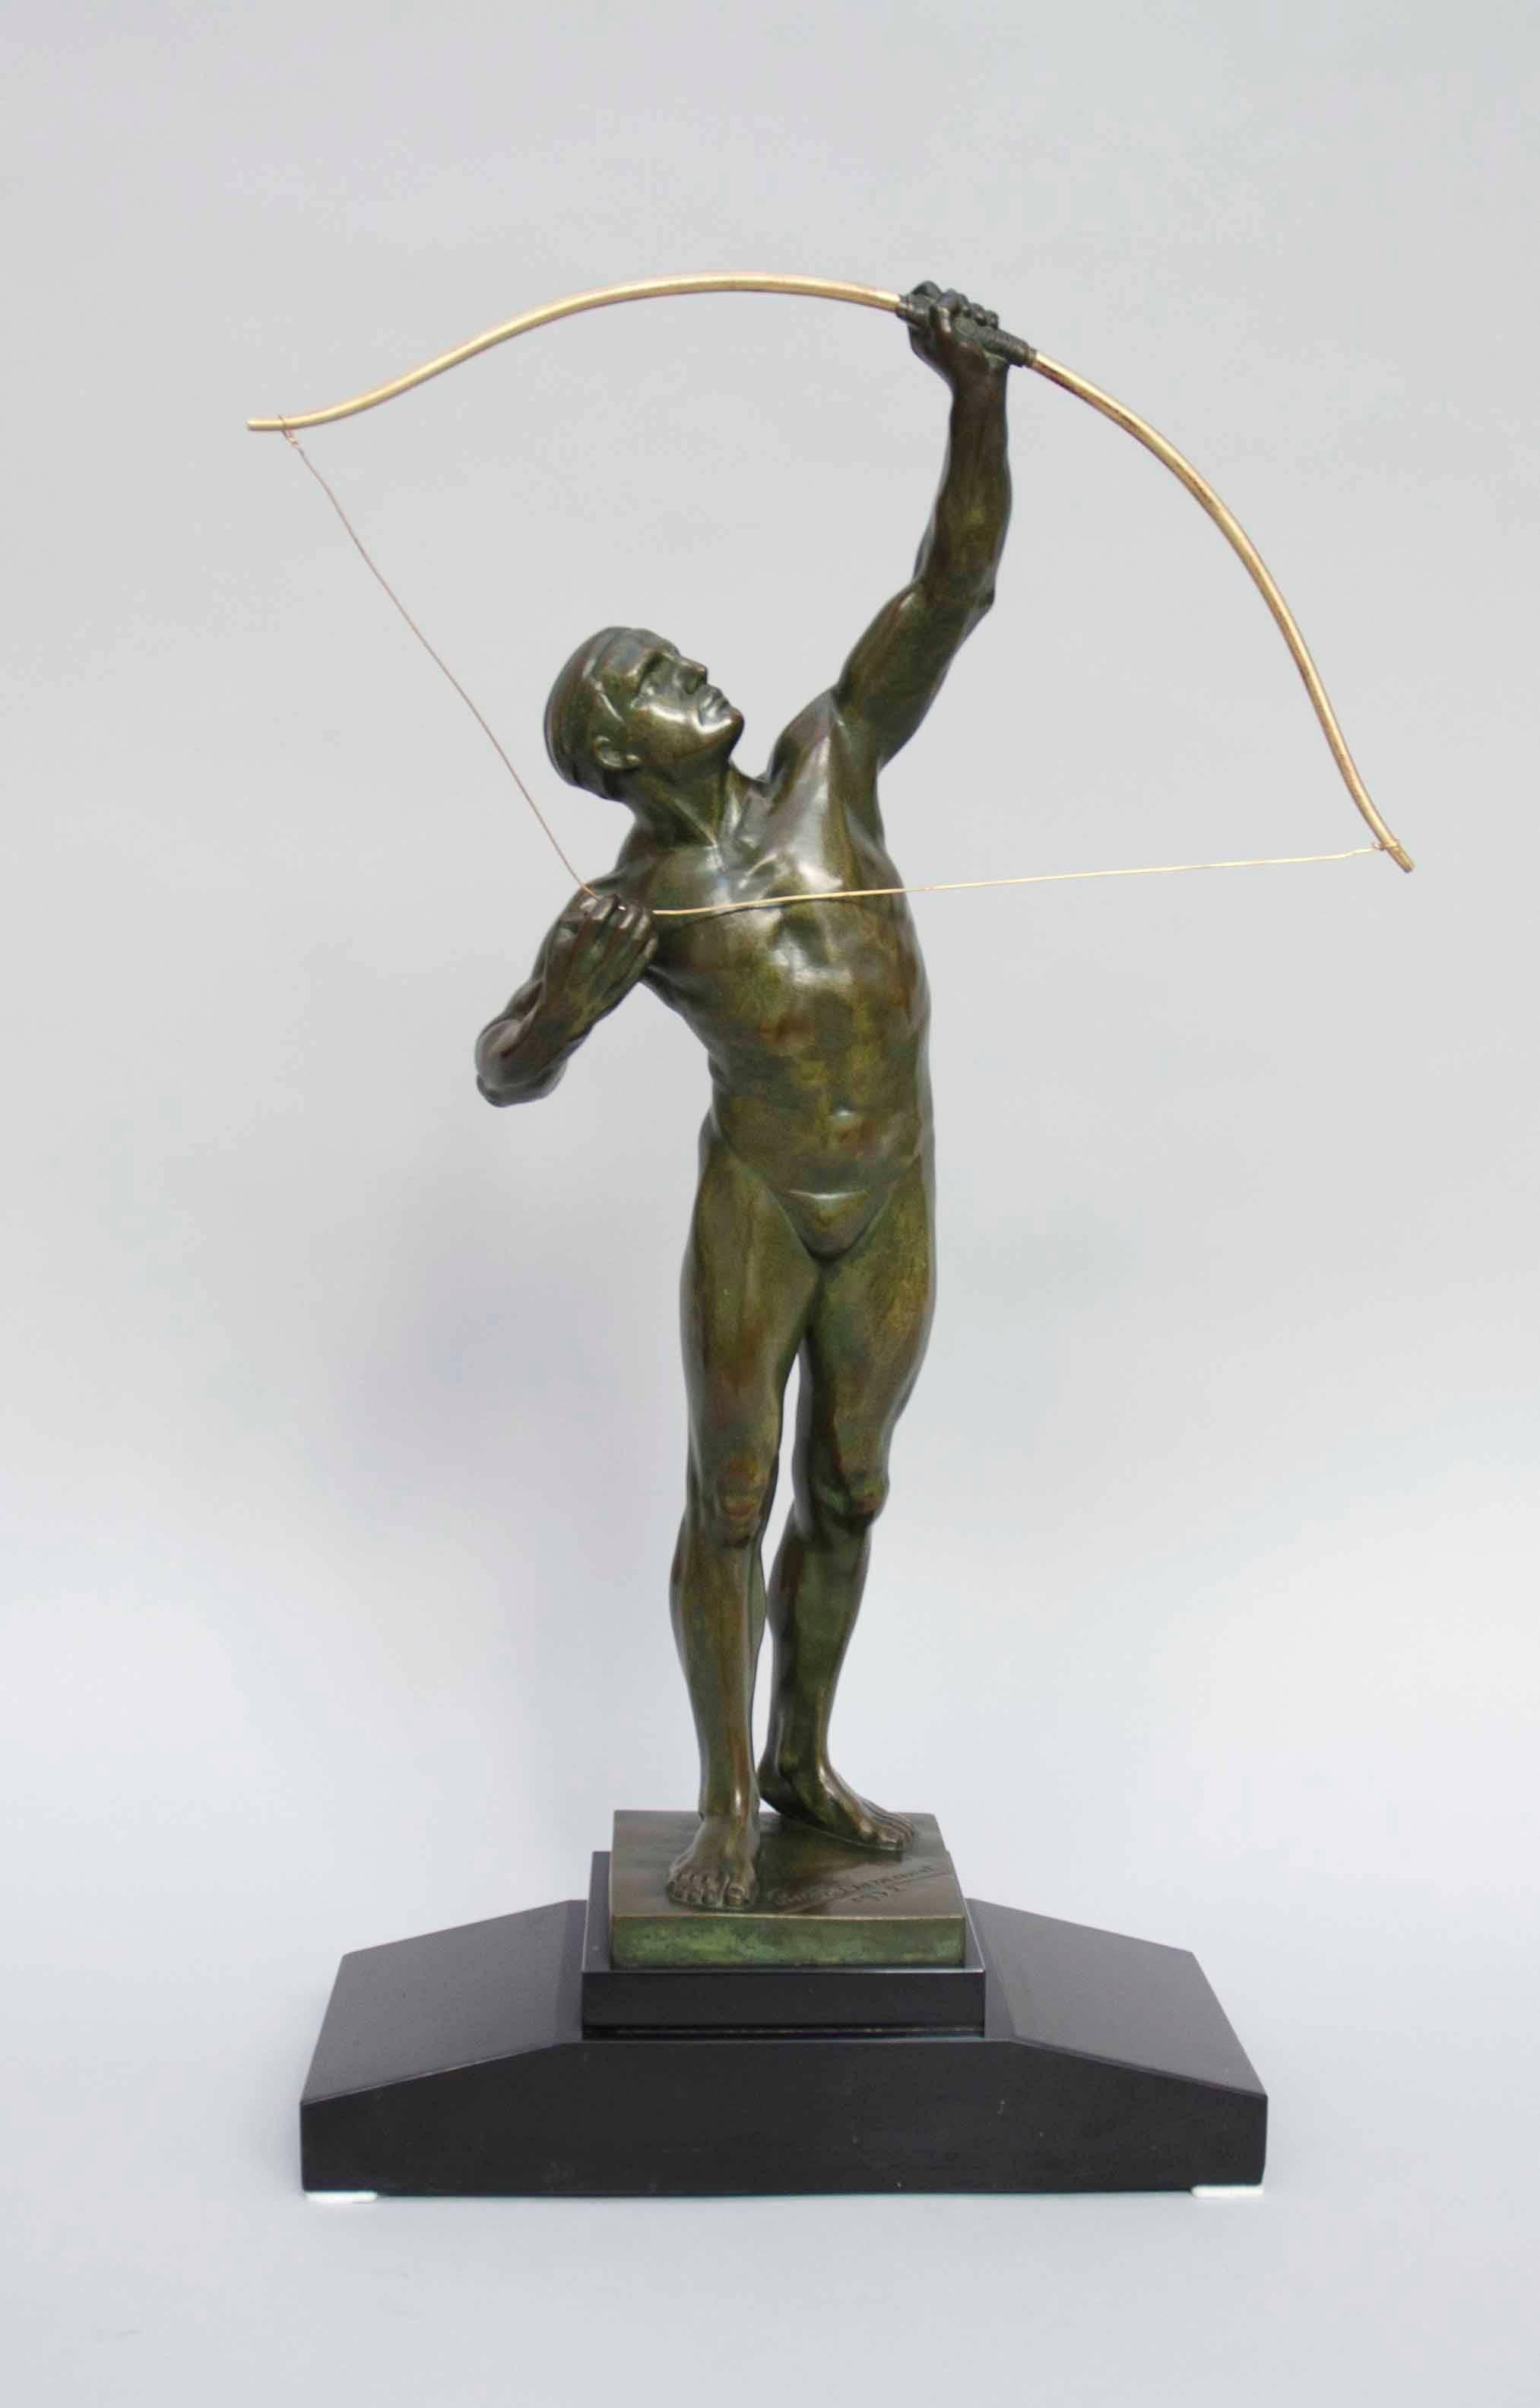 Beautiful Art Deco male archer. Brons with green sheen on black marble base.
Size: H 59cm with base, signed and dated 1932 on the terrasse.
Belgian School

Demanet studied fine art at the academy of Namur in Belgium before enrolling in the army.